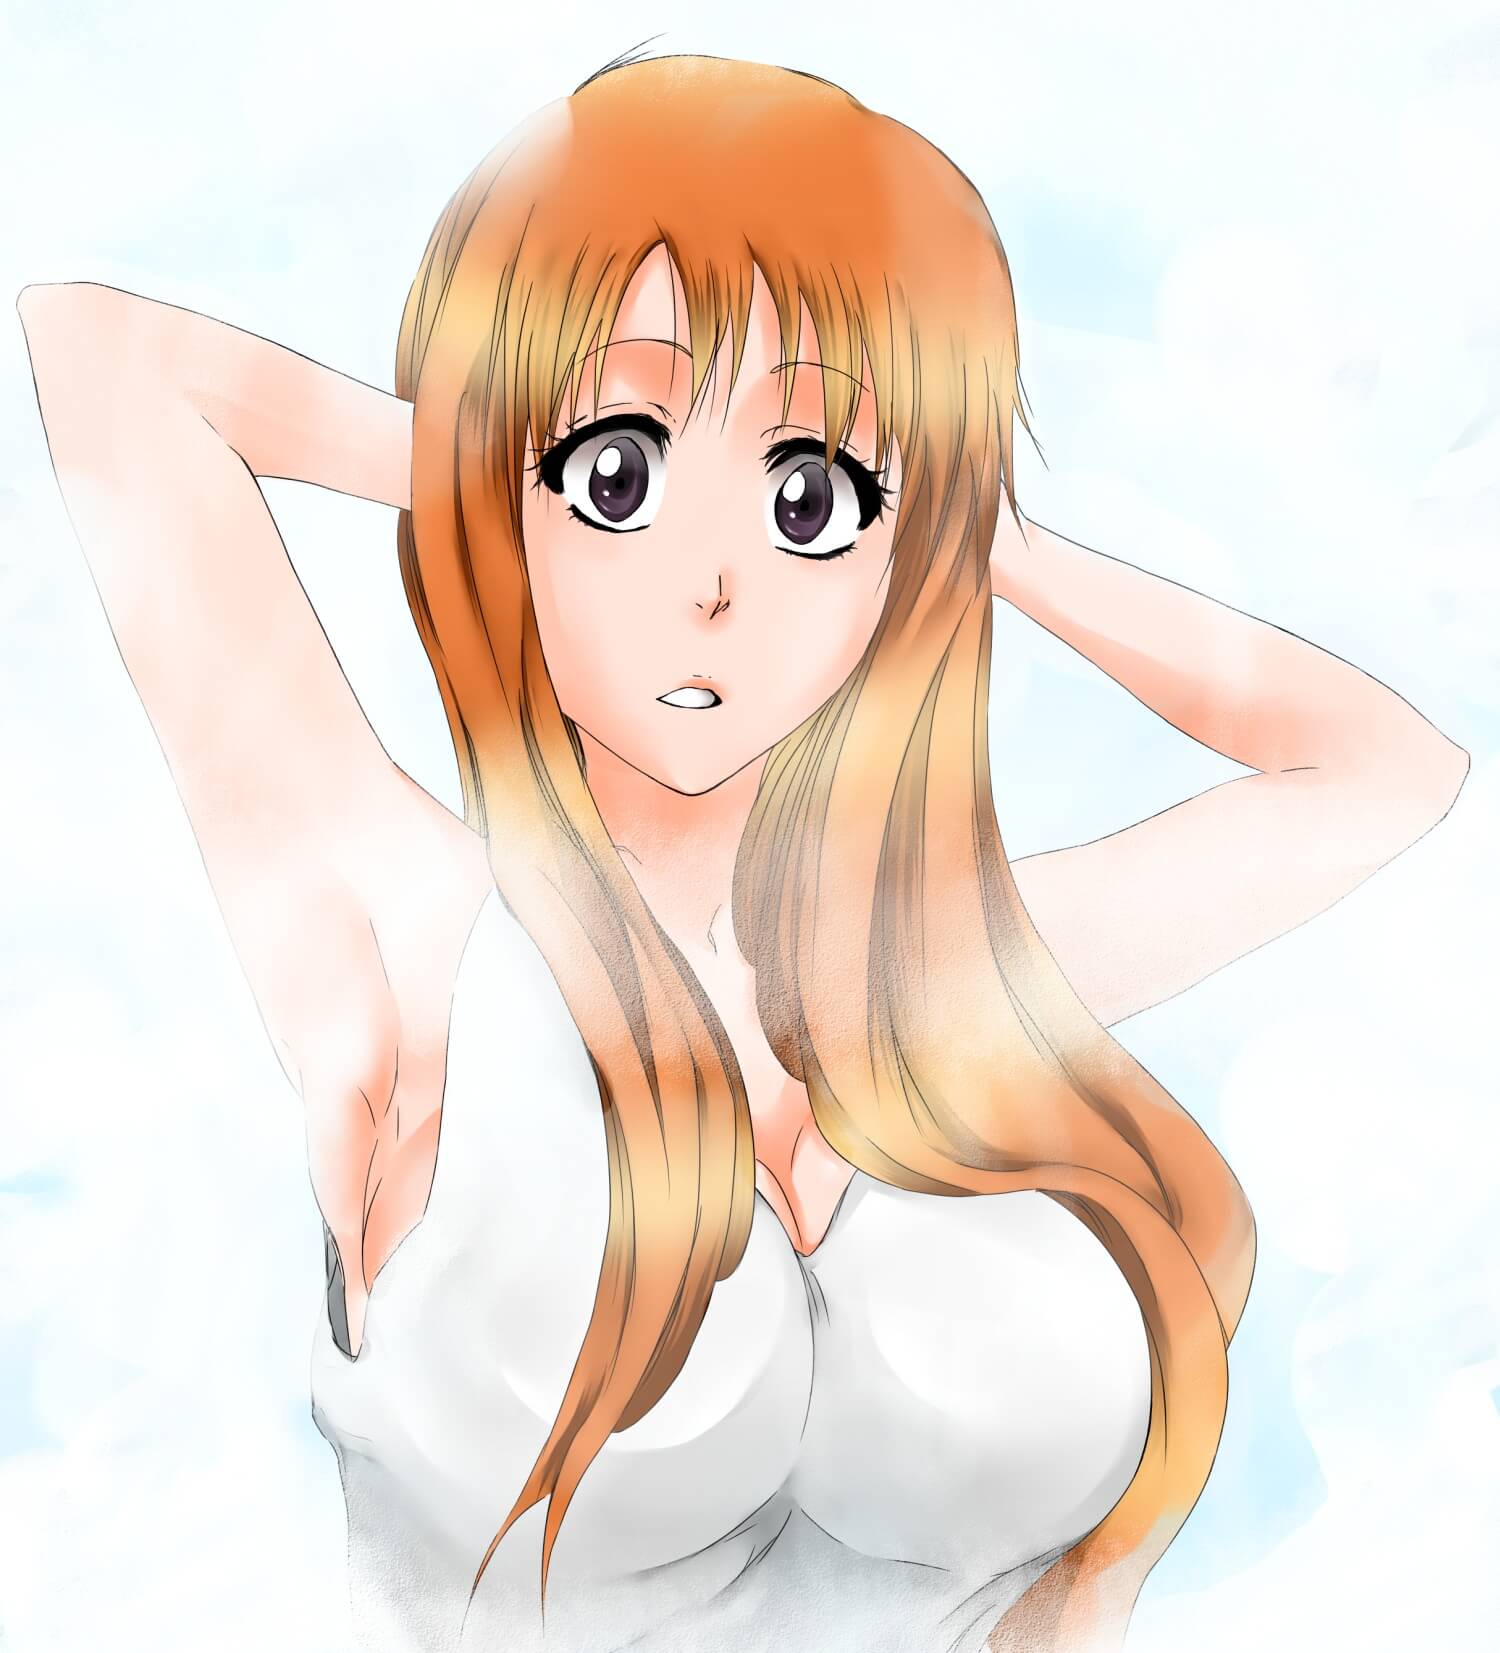 51 Sexy Orihime Inoue Boobs Pictures Are Windows Into Paradise | Best Of Comic Books